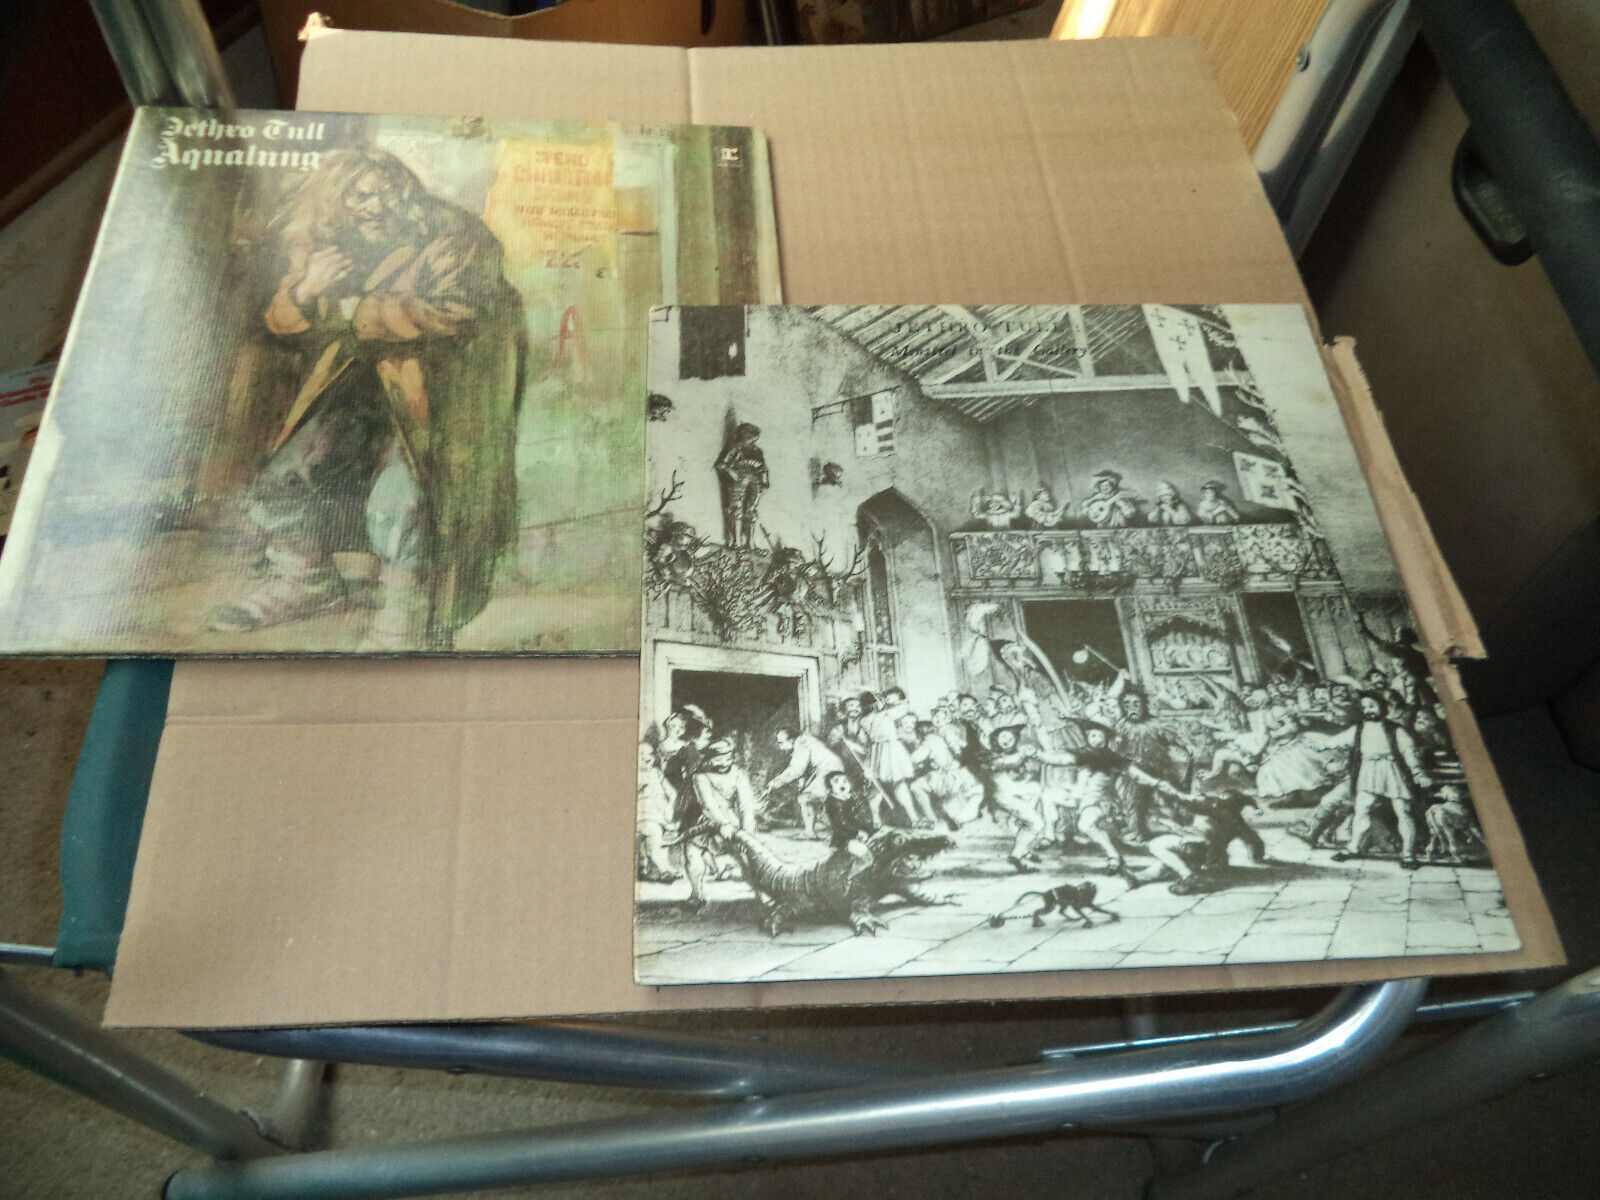 2 Vintage Jethro Tull LP Lot - Minstrel in the Gallery + Aqualung /Good Shape